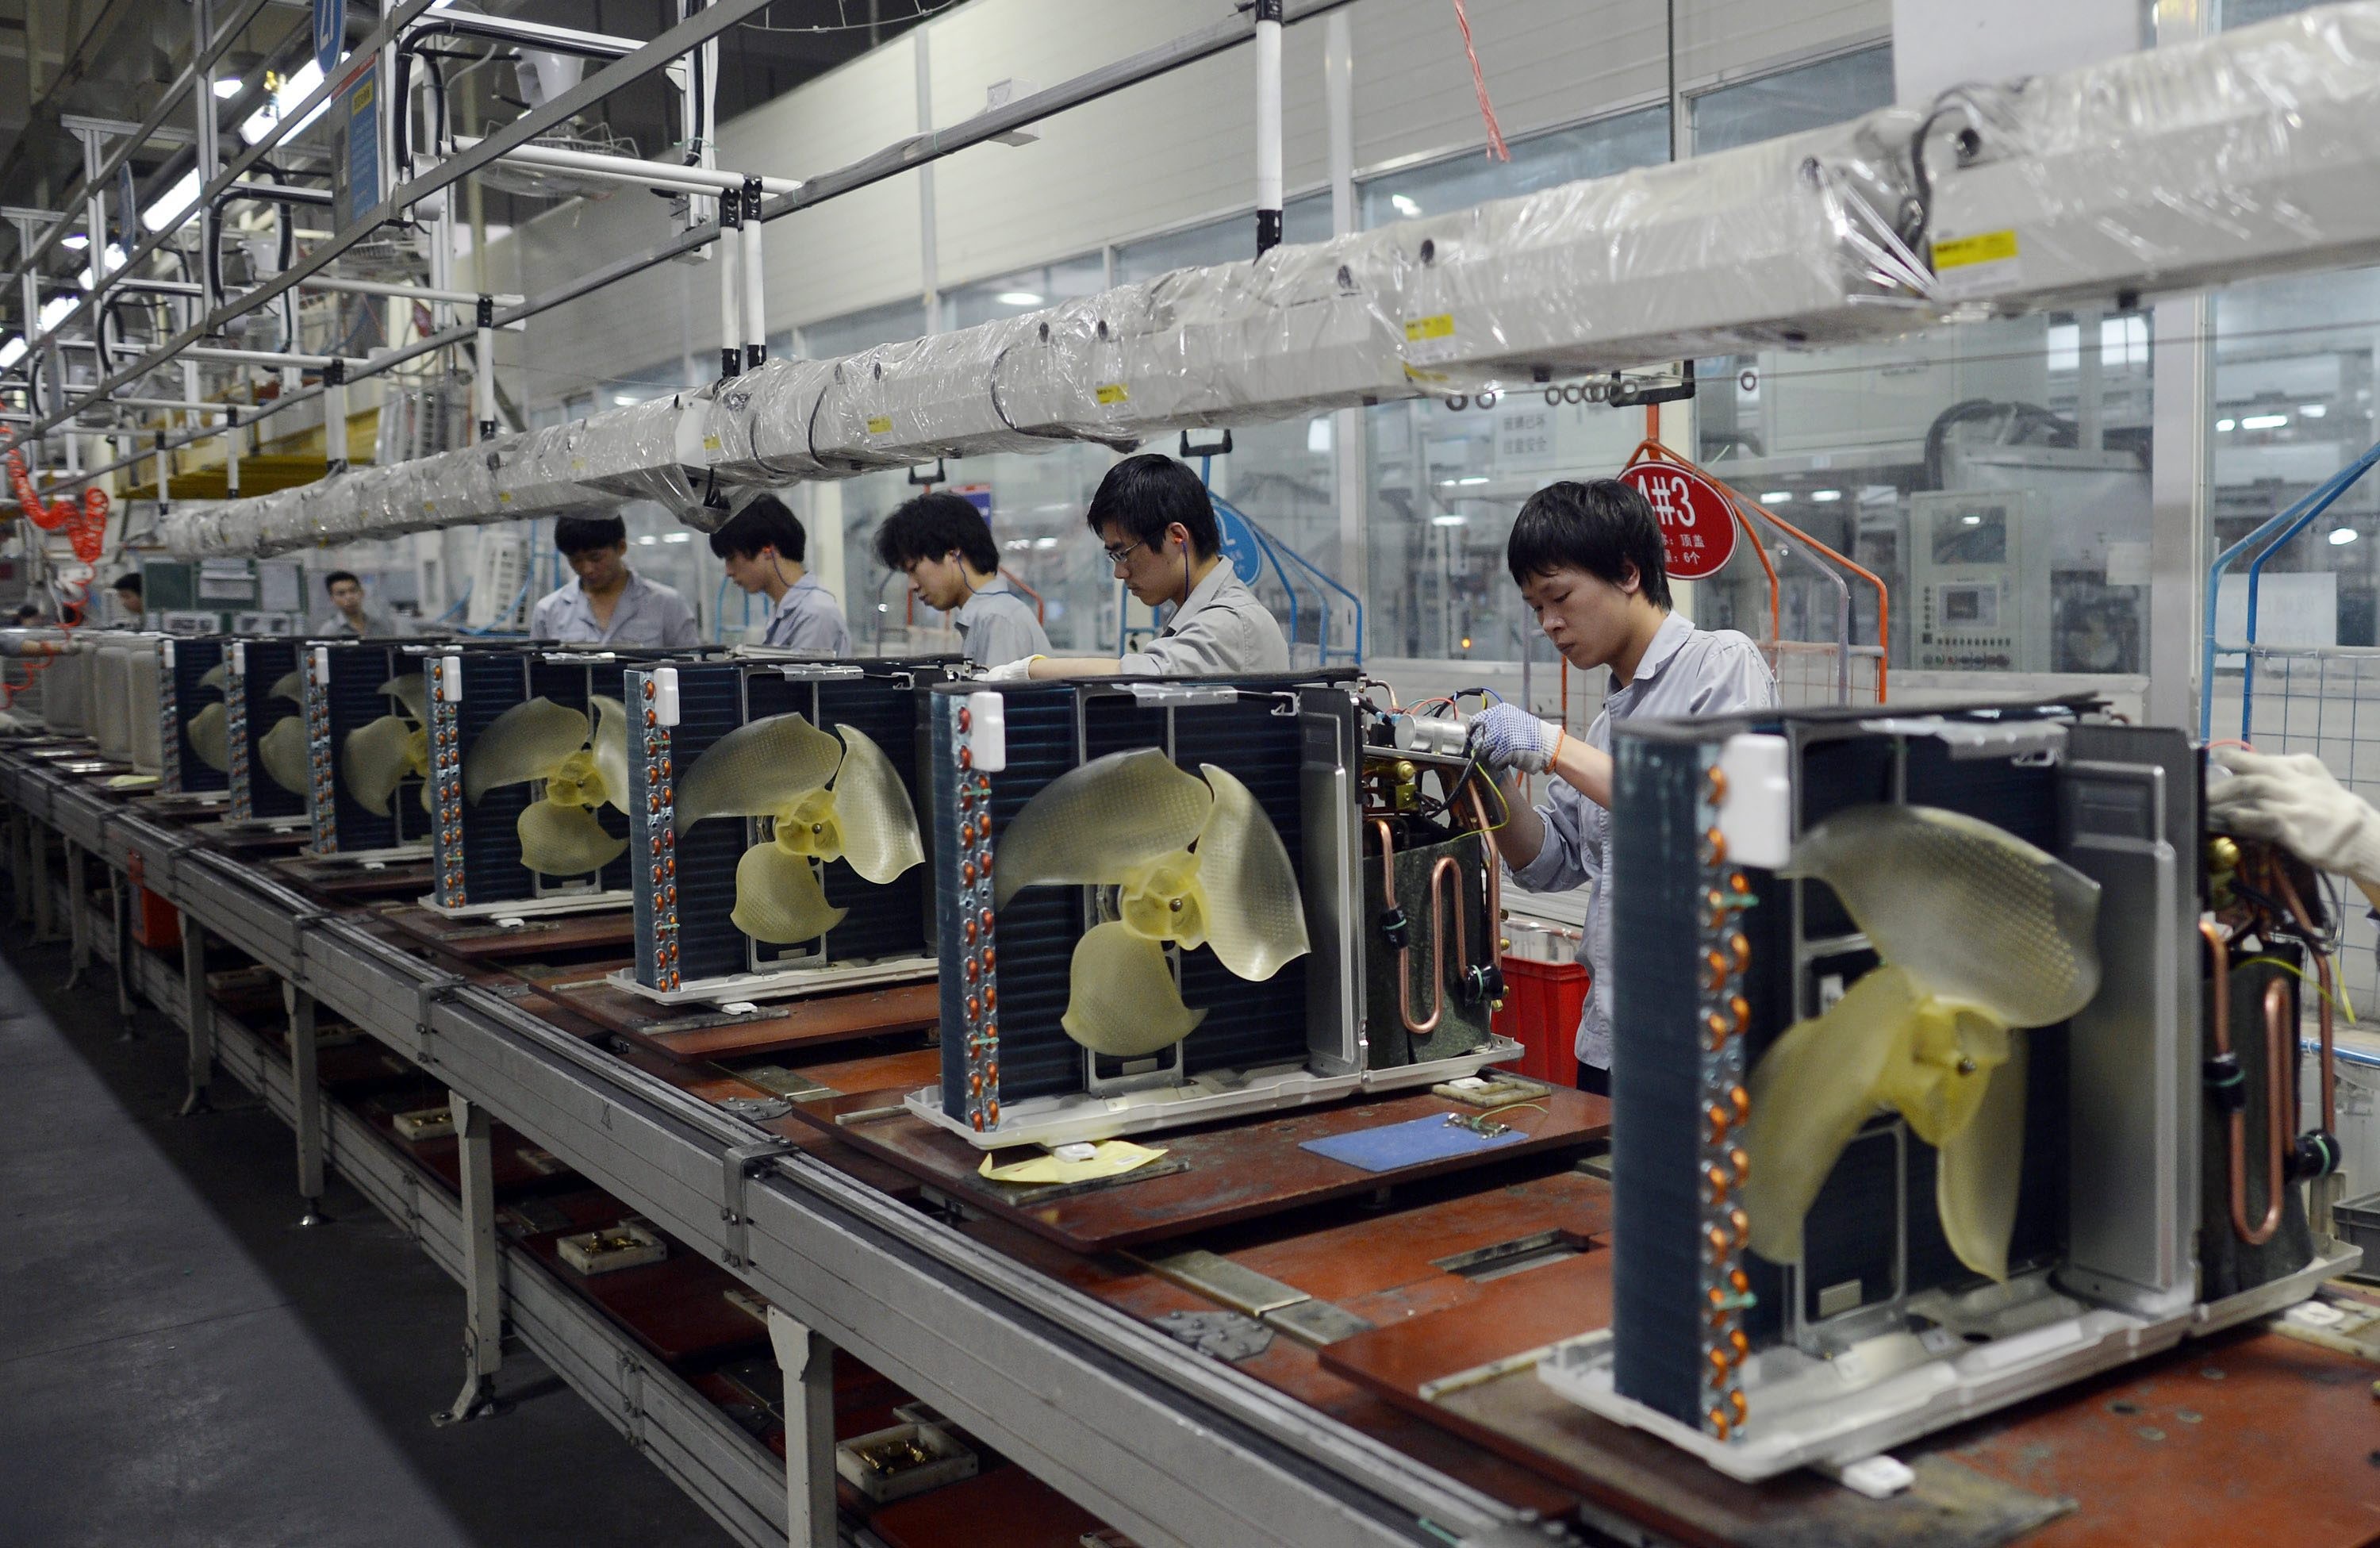 Workers assemble air conditioners at a Gree Electric Appliances factory in Wuhan, China. China is already the world’s top producer of air conditioners and is expected to be a key player in the installation of 1 billion more globally over the next decade. Photo: EPA